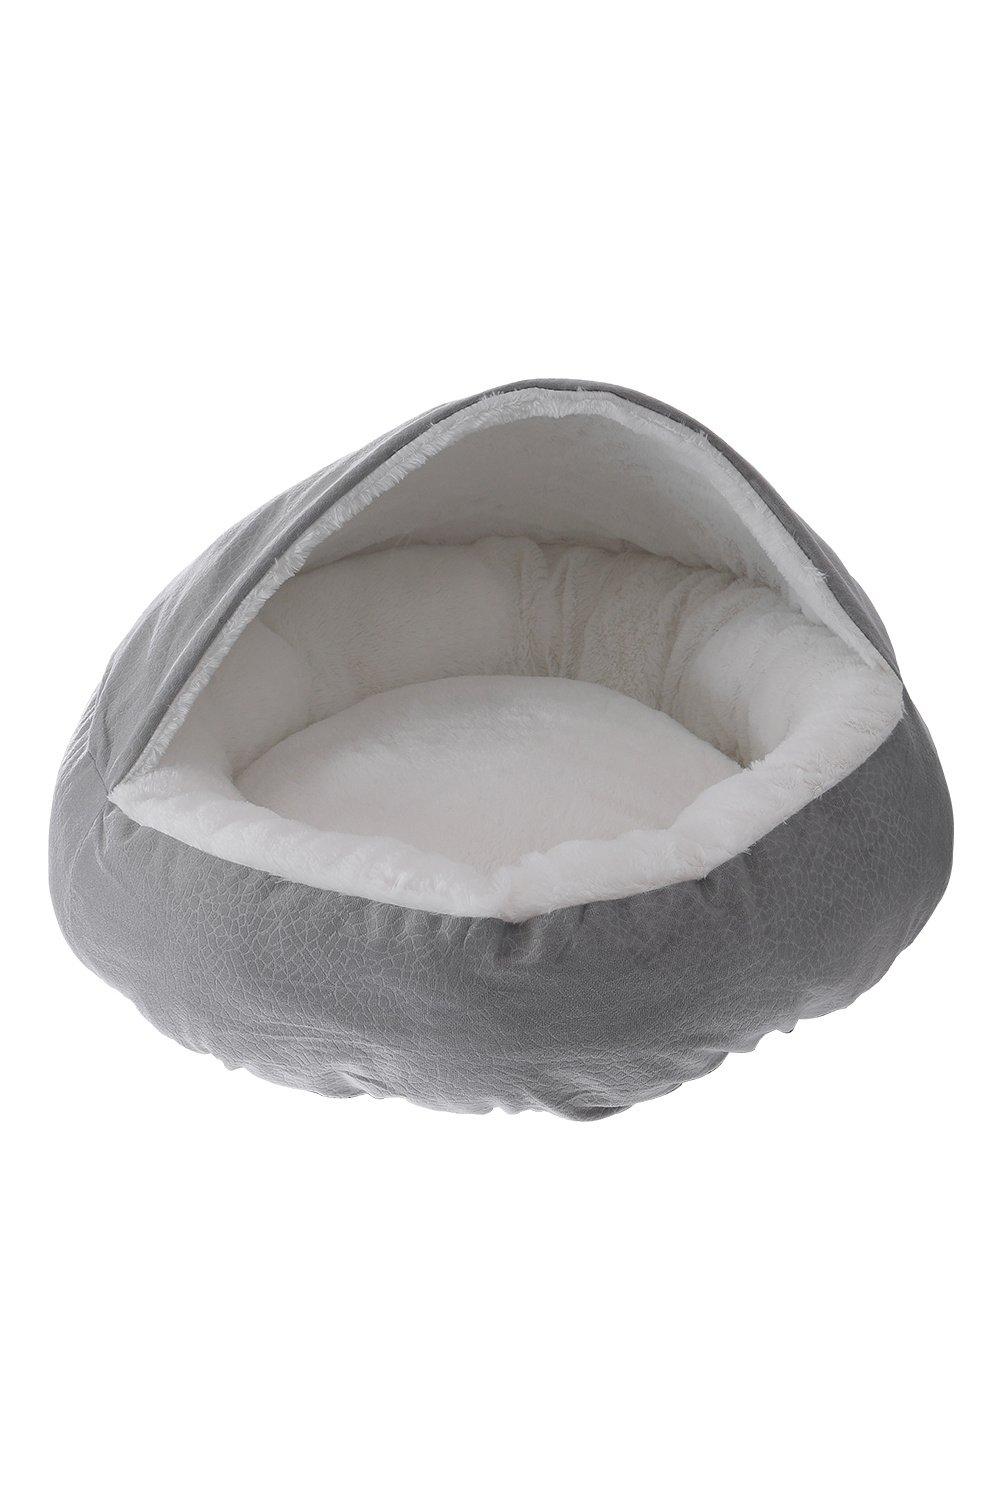 Soft Shell Pet Dog Cat Bed